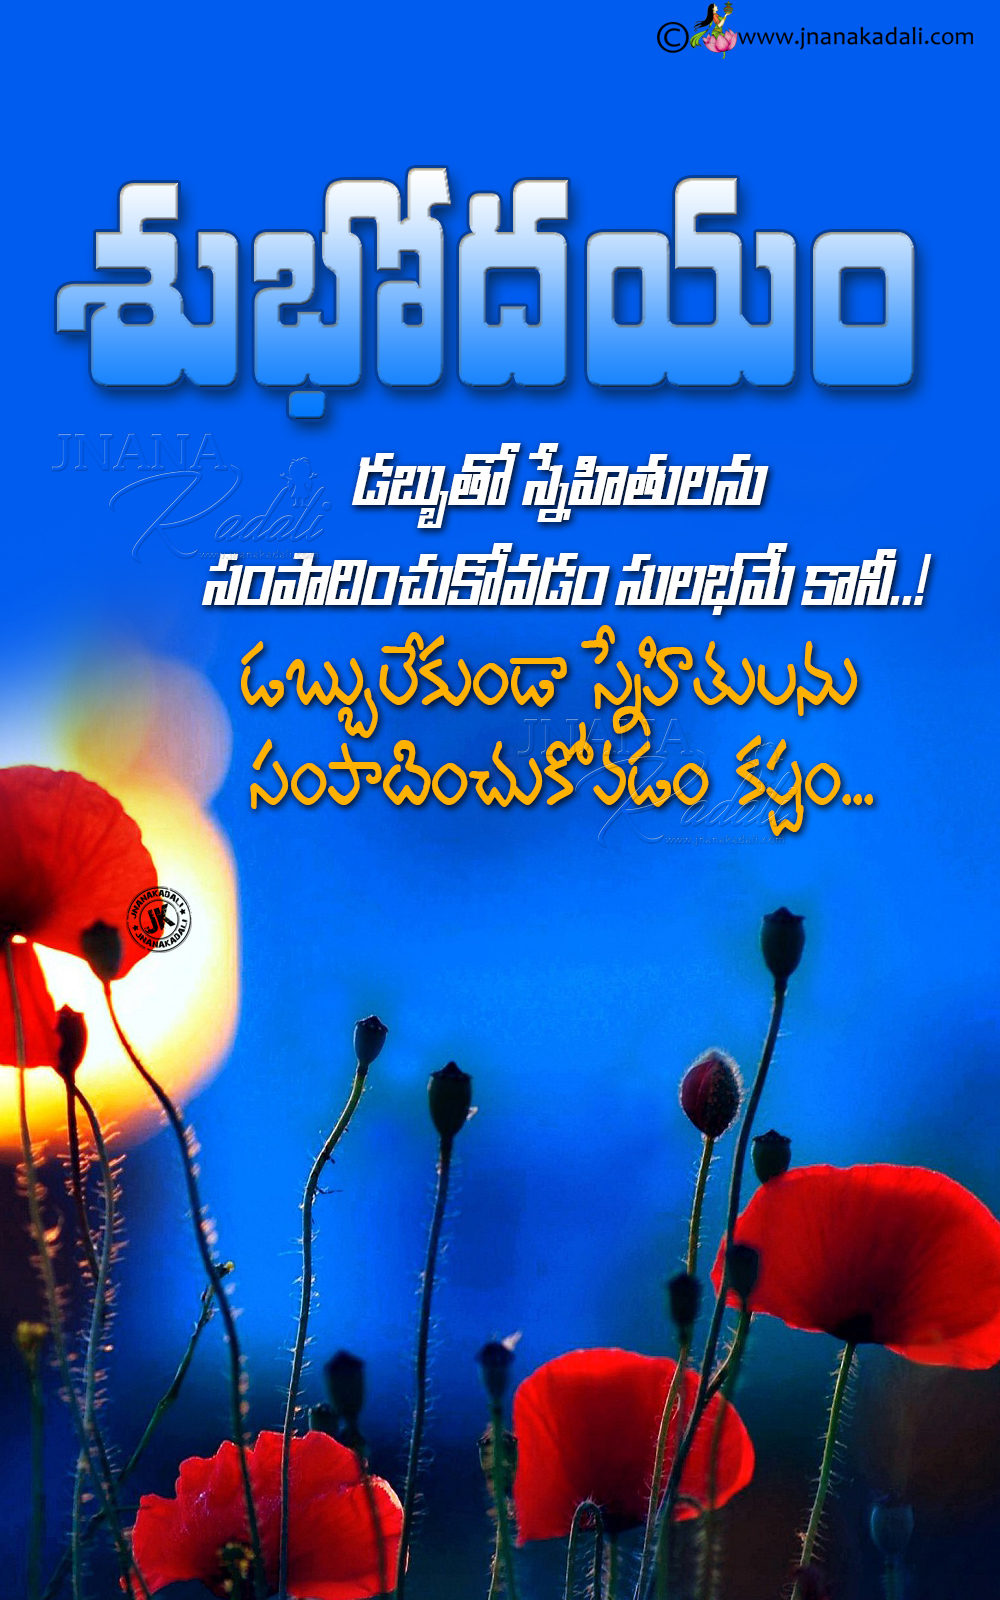 Self Motivational Success Messages in Telugu With Good Morning ...